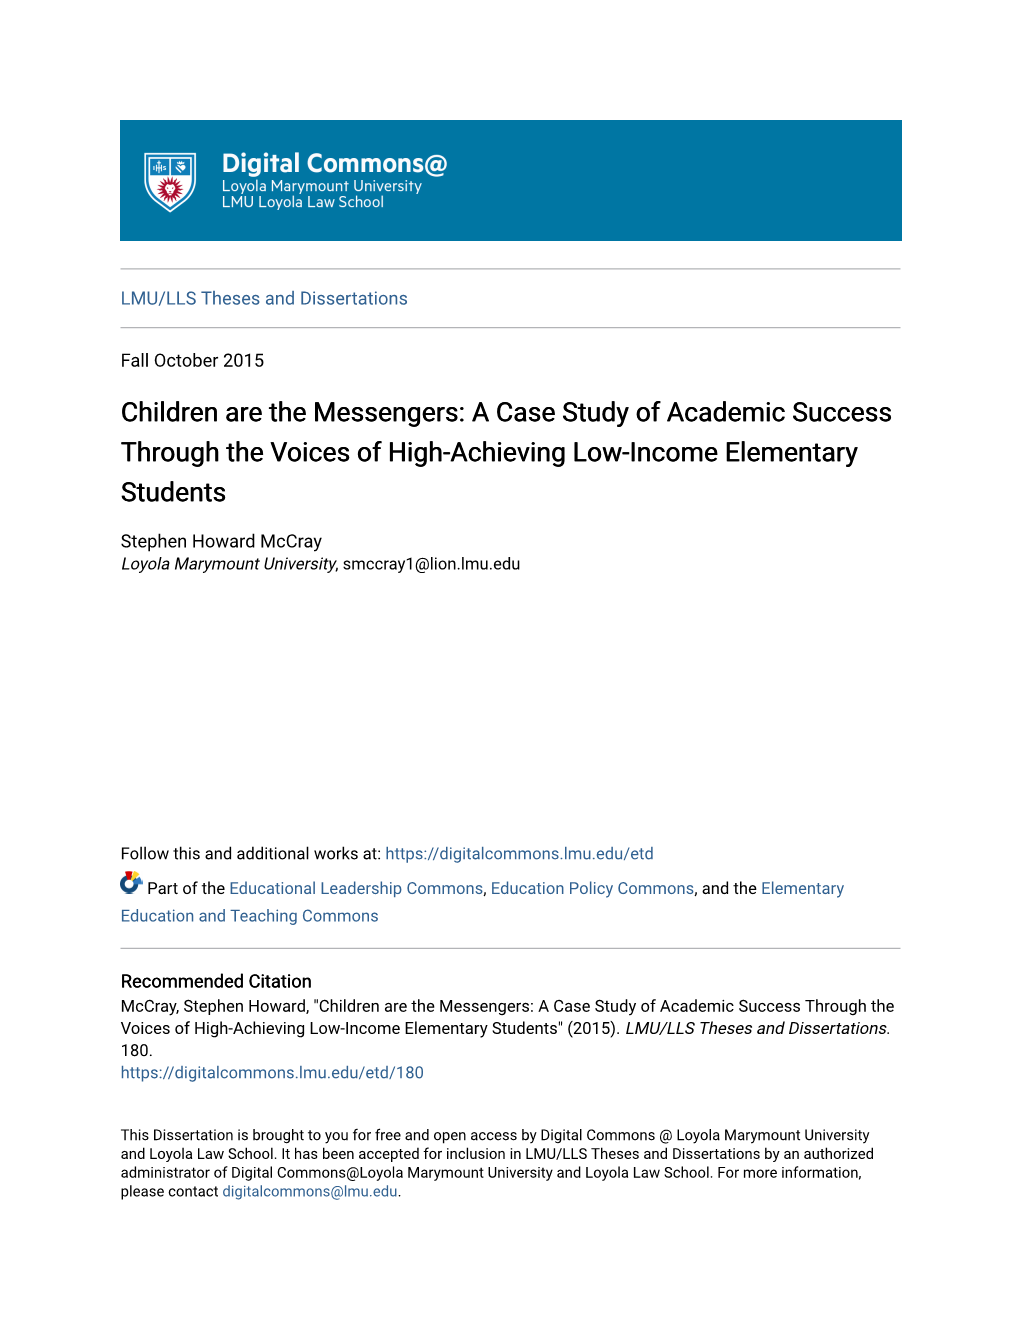 A Case Study of Academic Success Through the Voices of High-Achieving Low-Income Elementary Students